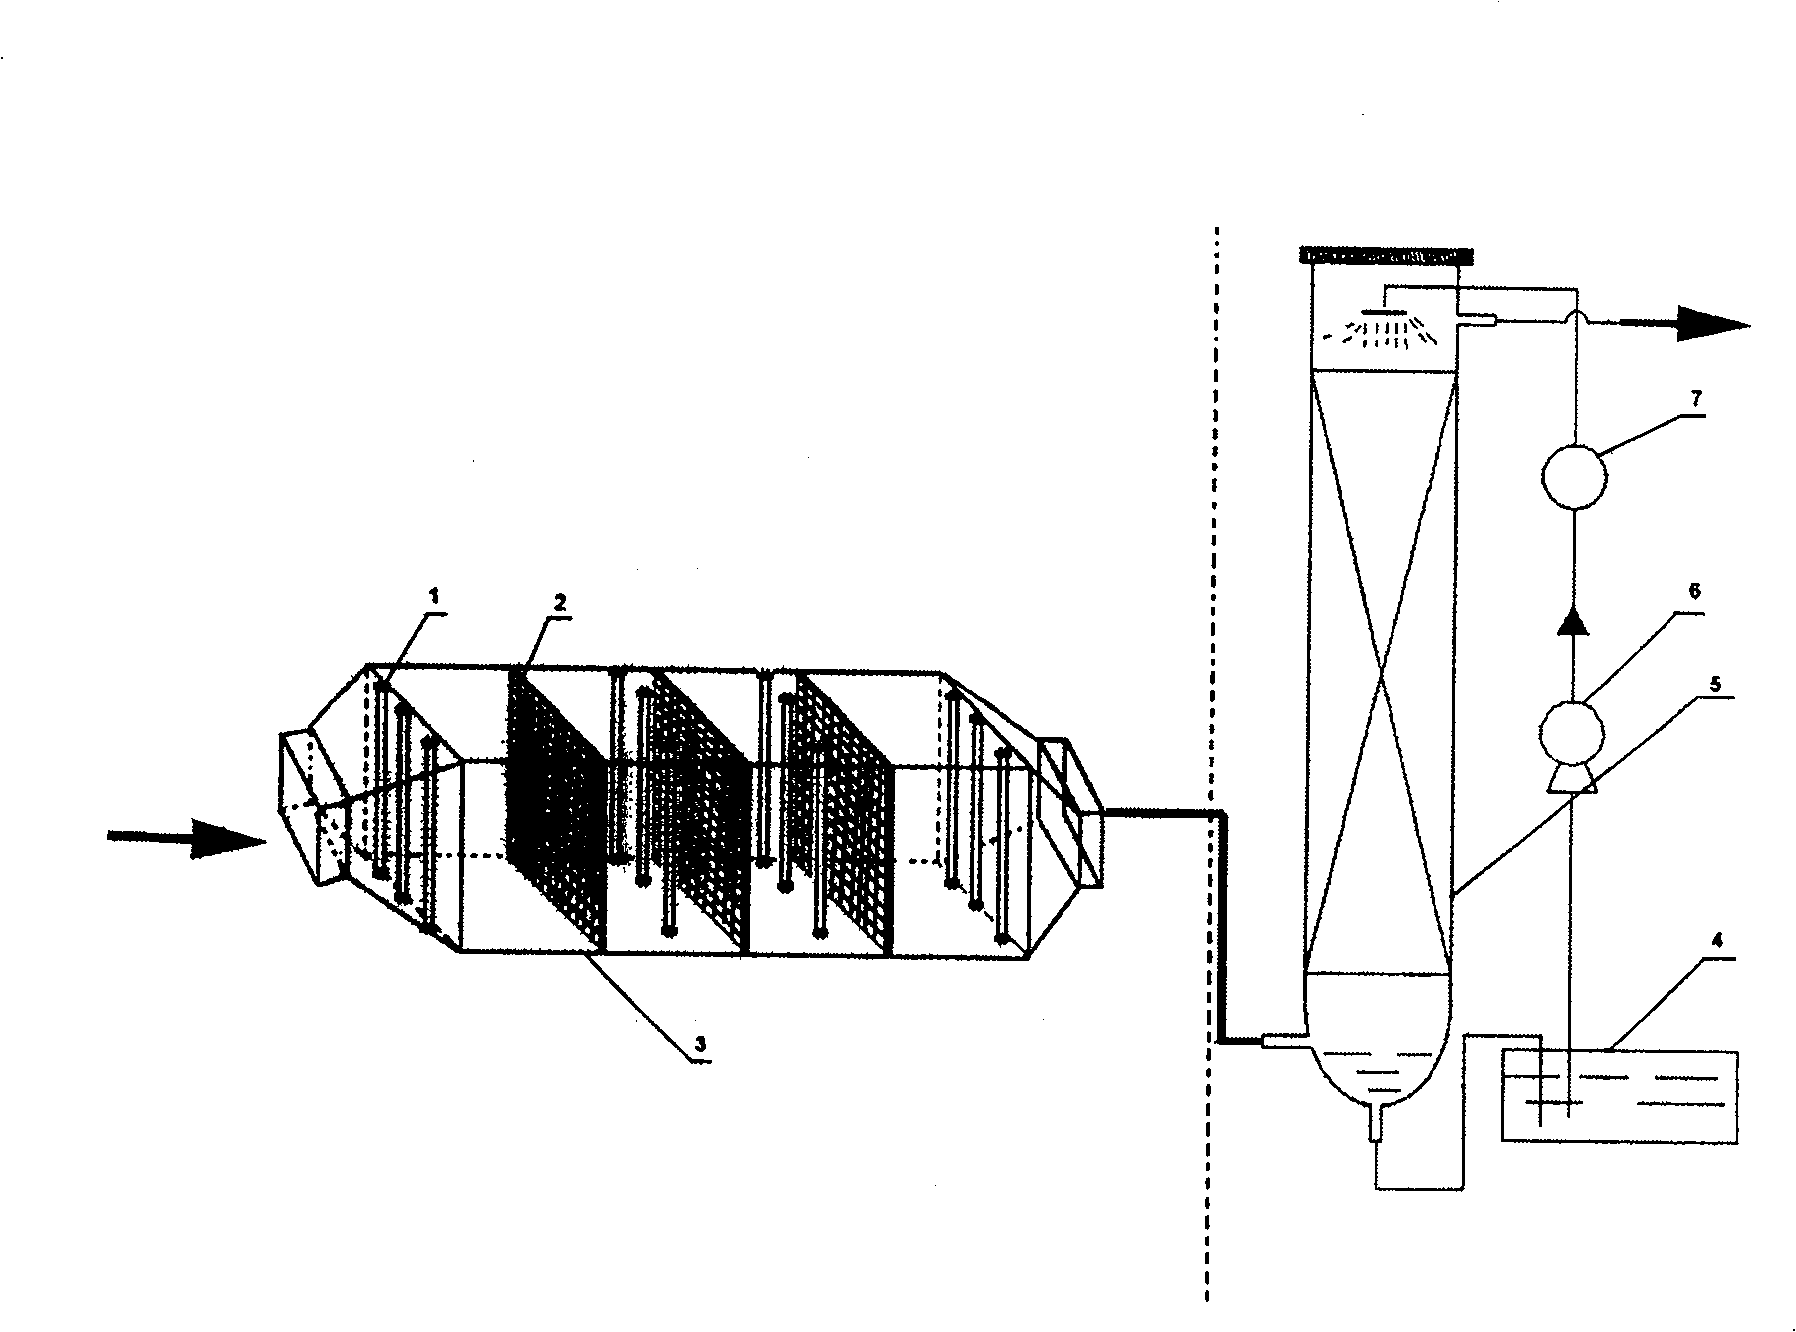 Flue gas combined desulfurization and denitration method